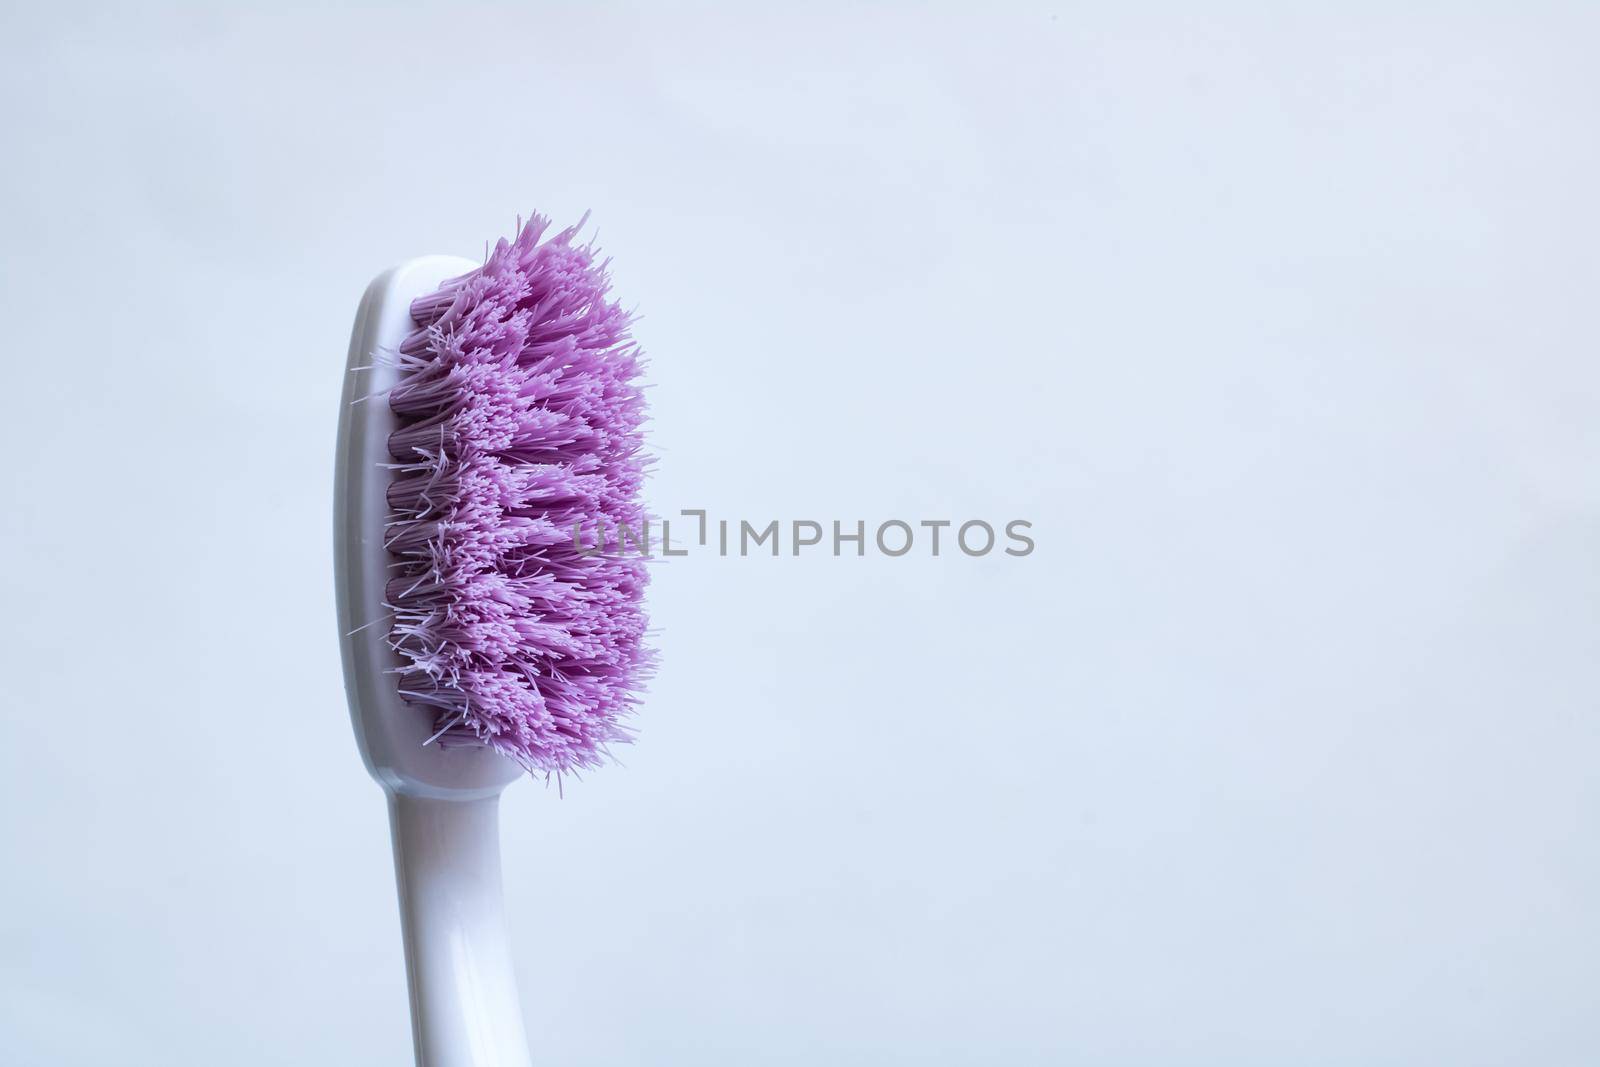 Toothbrush with purple pile close-up on a white background, copy space